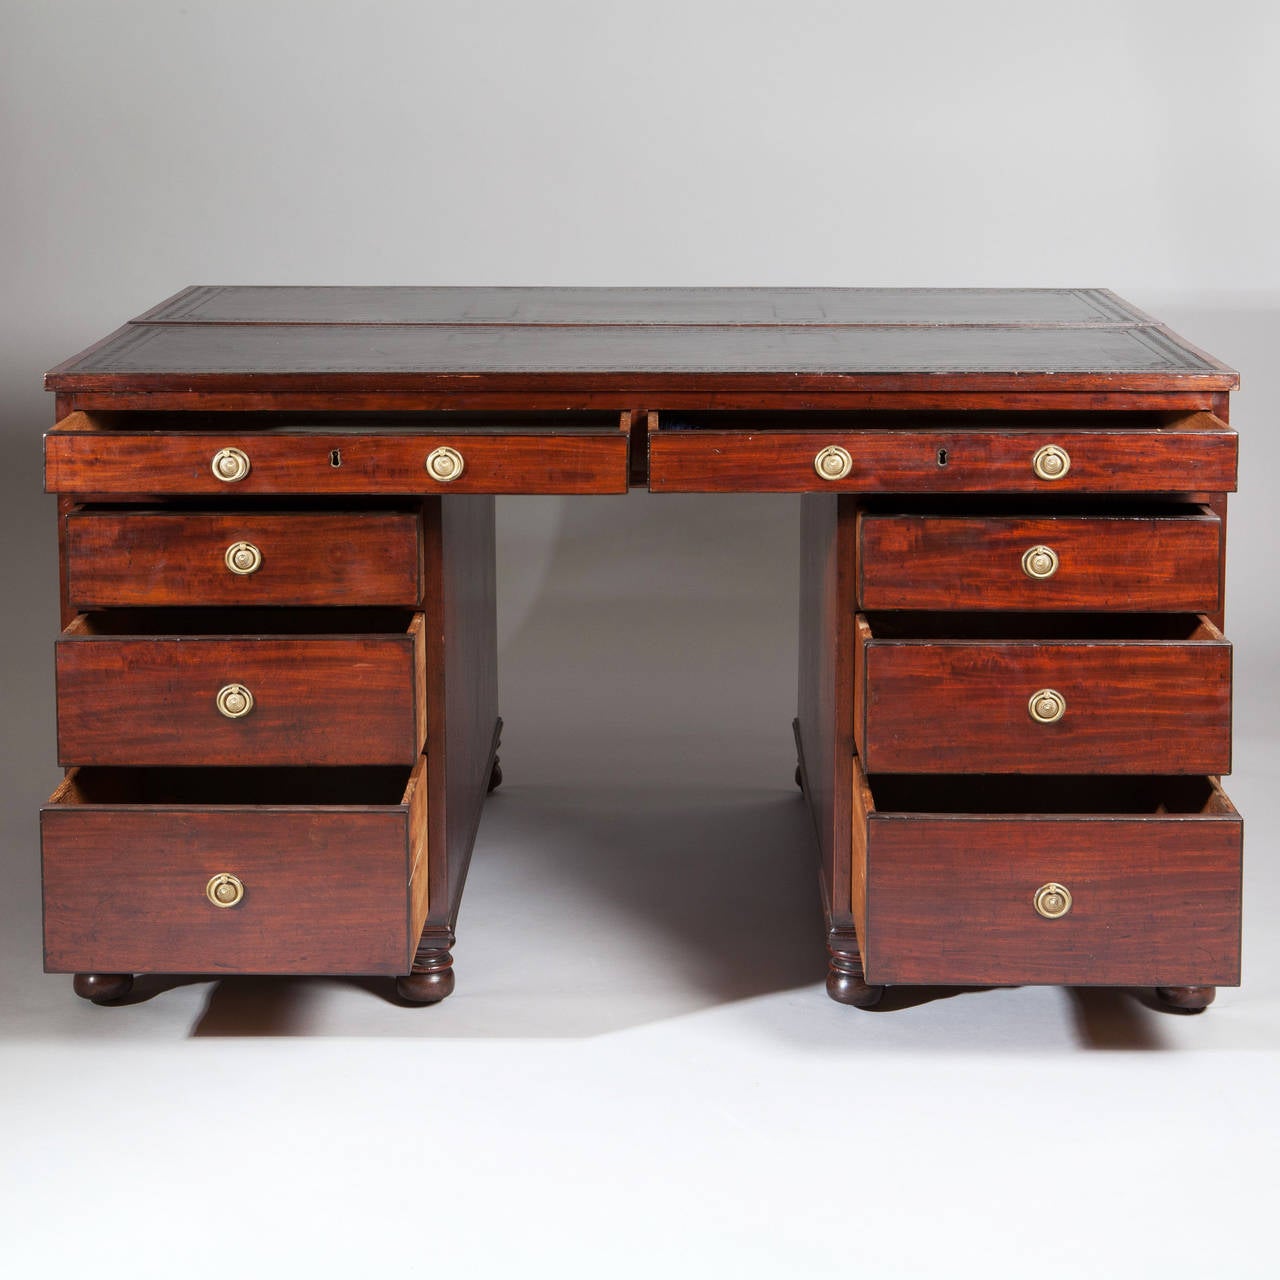 A fine late 18th century George III figured mahogany pedestal architects or library desk, the broad top, divided with two adjustable slopes, above two long drawers on each side, the front side with two banks of three graduated drawers and the other